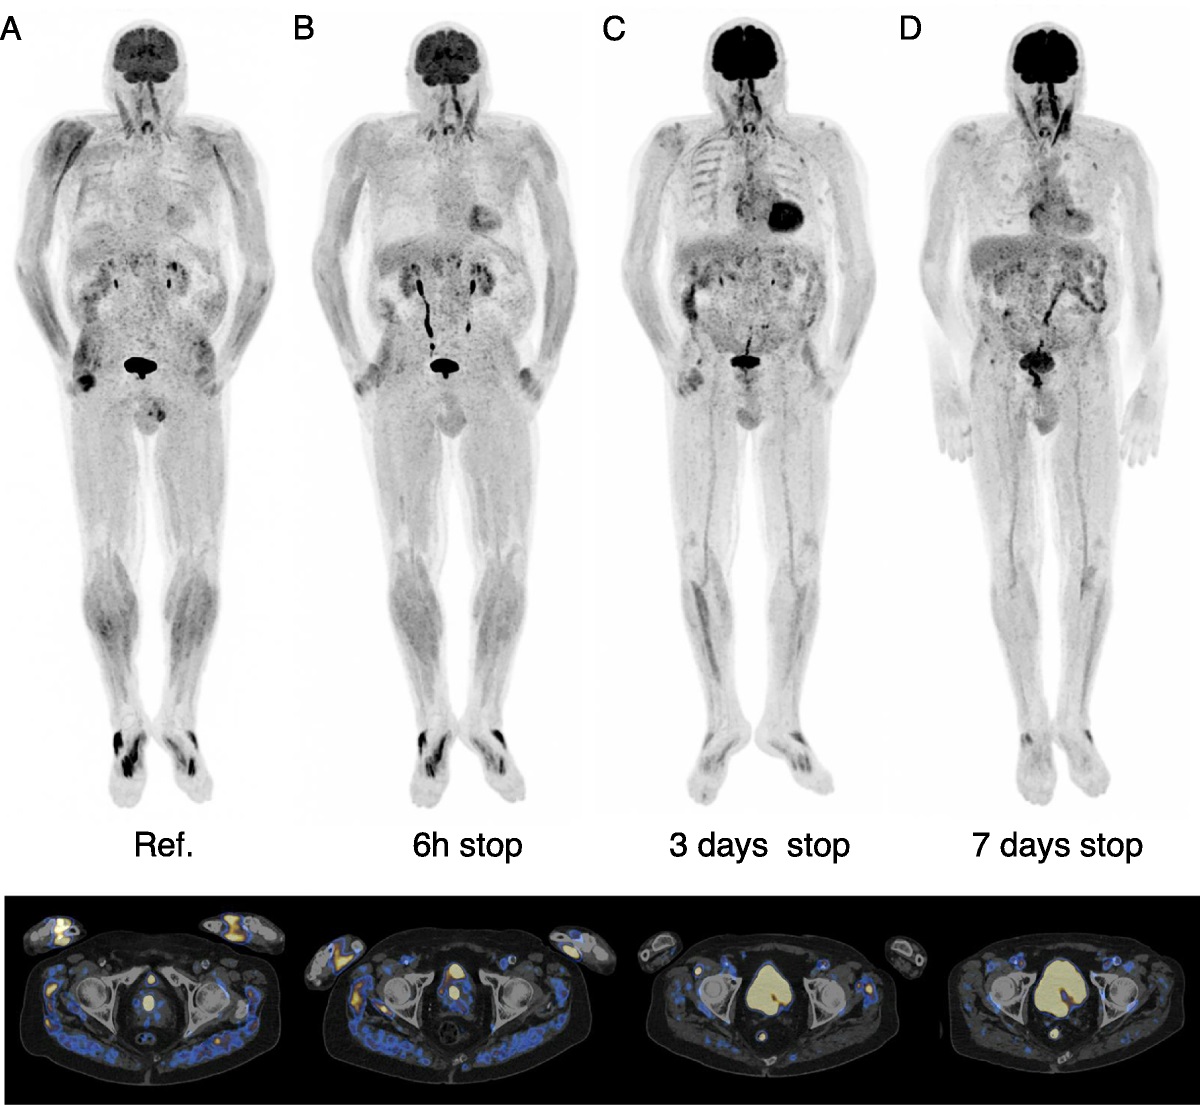 18F-FDG Muscular Uptake in Statin-Associated Symptoms Without Myositis: How Long to Stop Treatment for Image Quality Improvement?